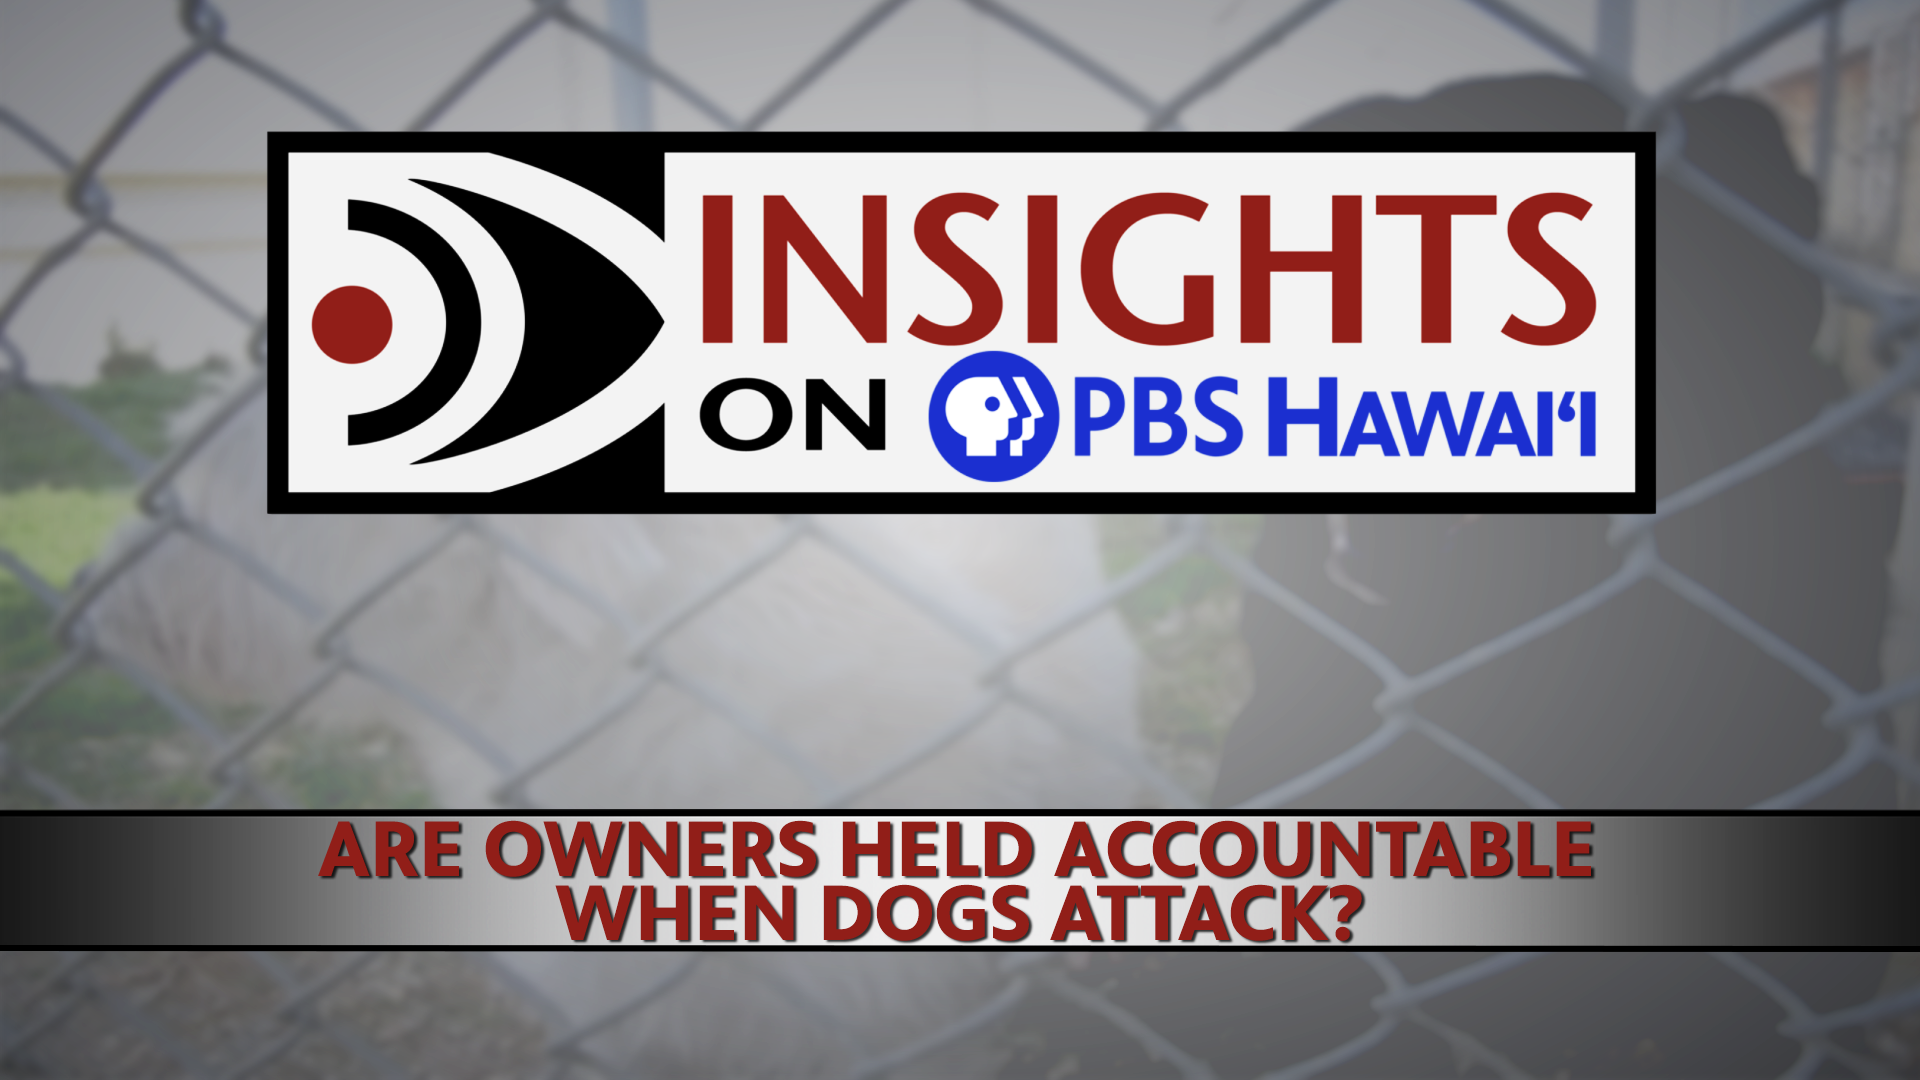 INSIGHTS ON PBS HAWAIʻI <br/>Are Owners Held Accountable When Dogs Attack?